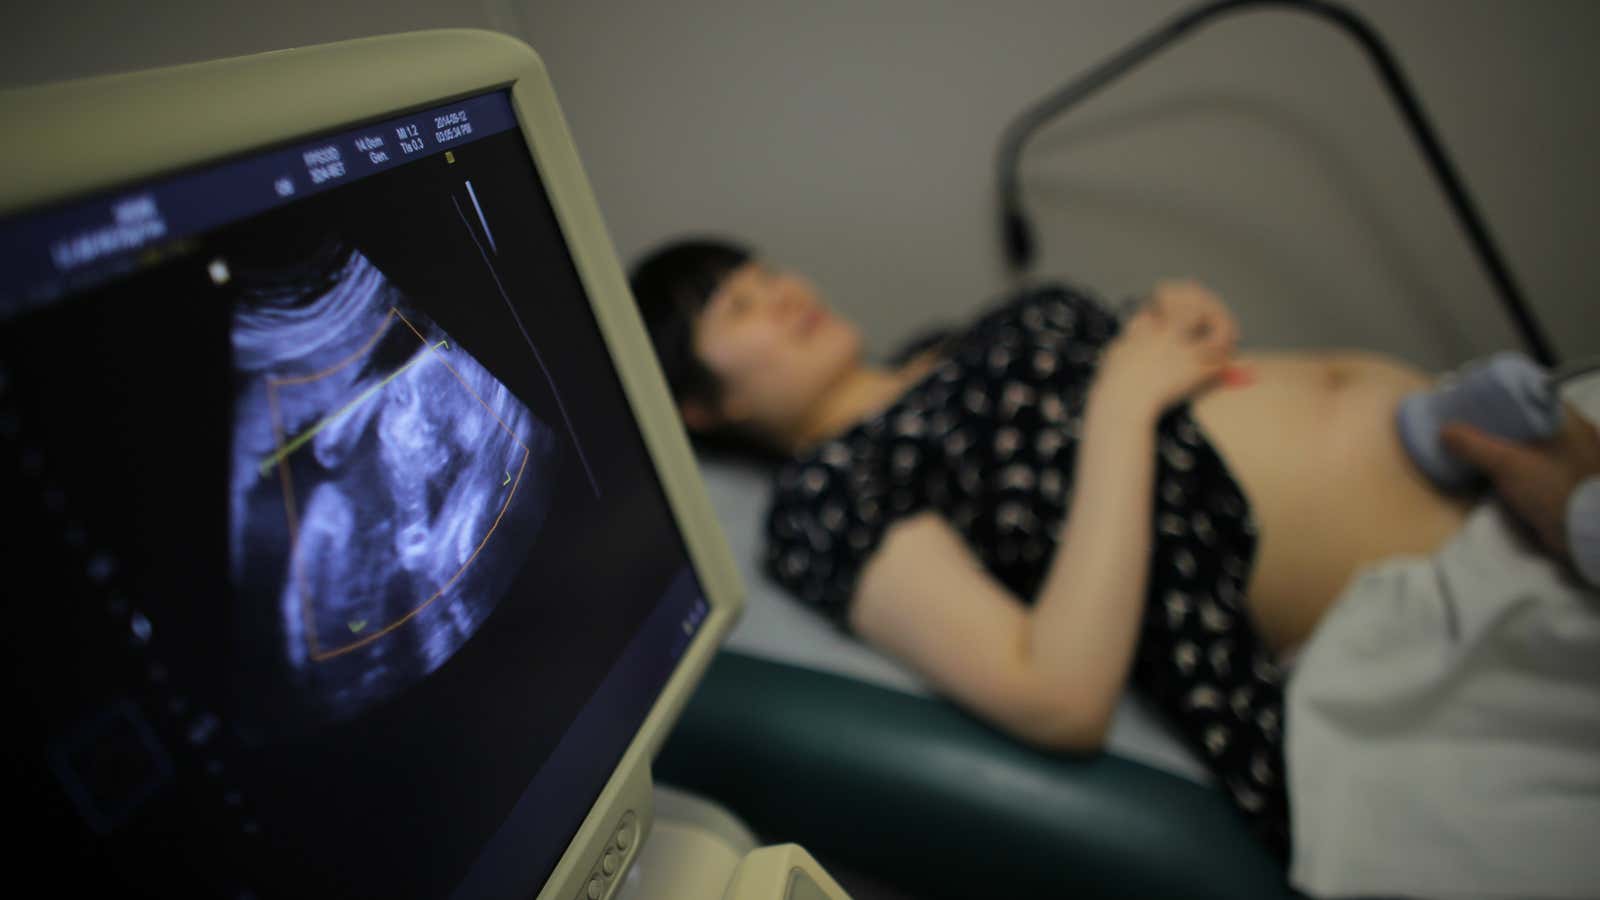 Wu Tianyang, who is five month pregnant with her second child, attends a sonogram at a local hospital in Shanghai September 12, 2014. REUTERS/Carlos Barria…